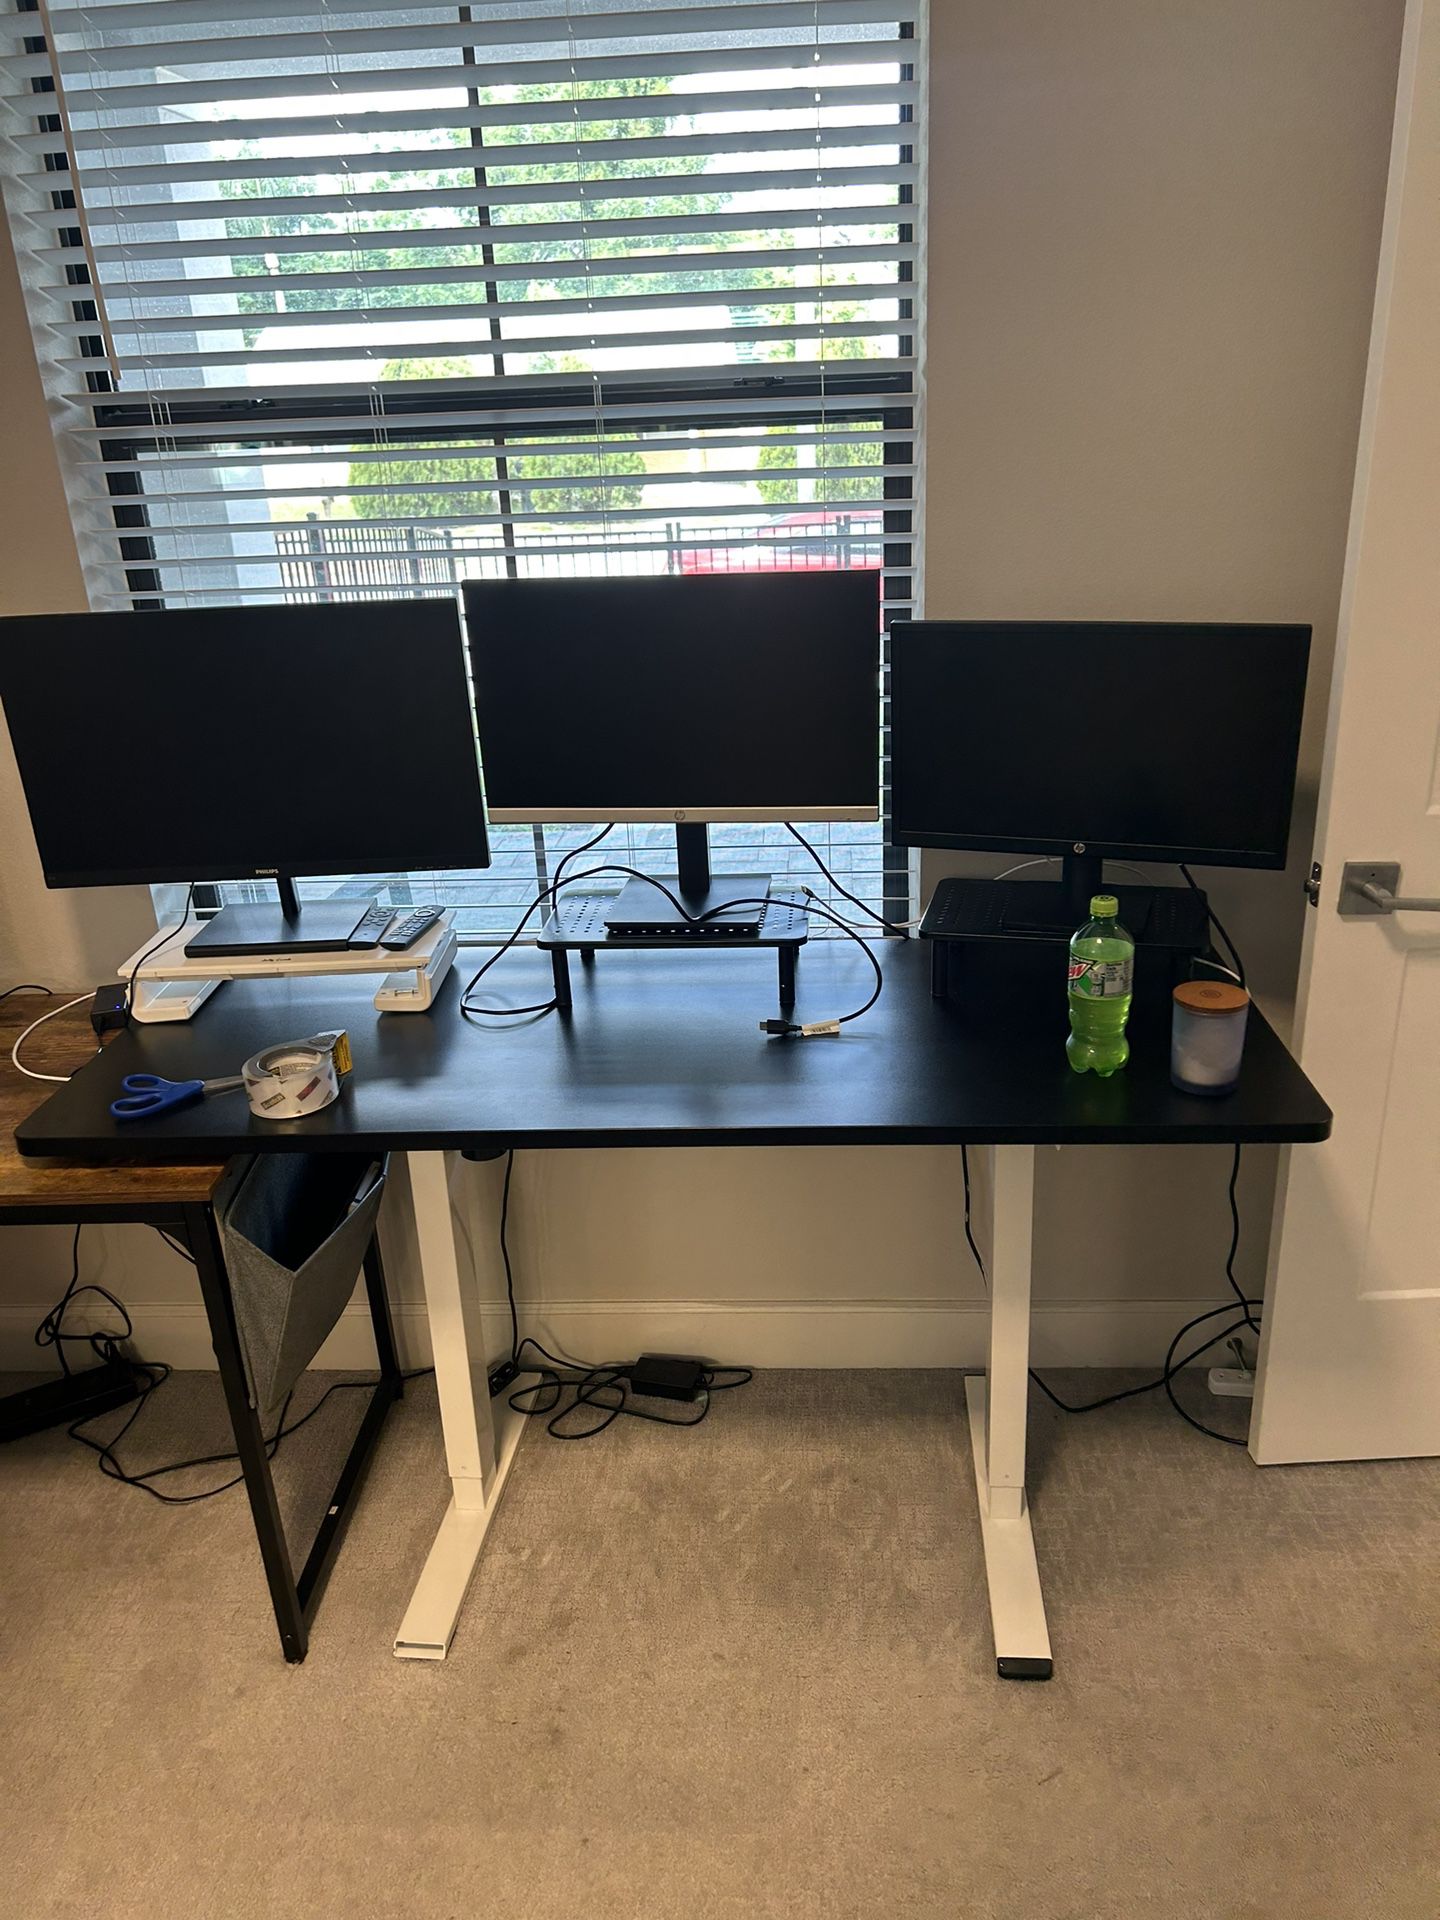 Motorized Office Desk (Goes up And Down For Standing Sitting Work)